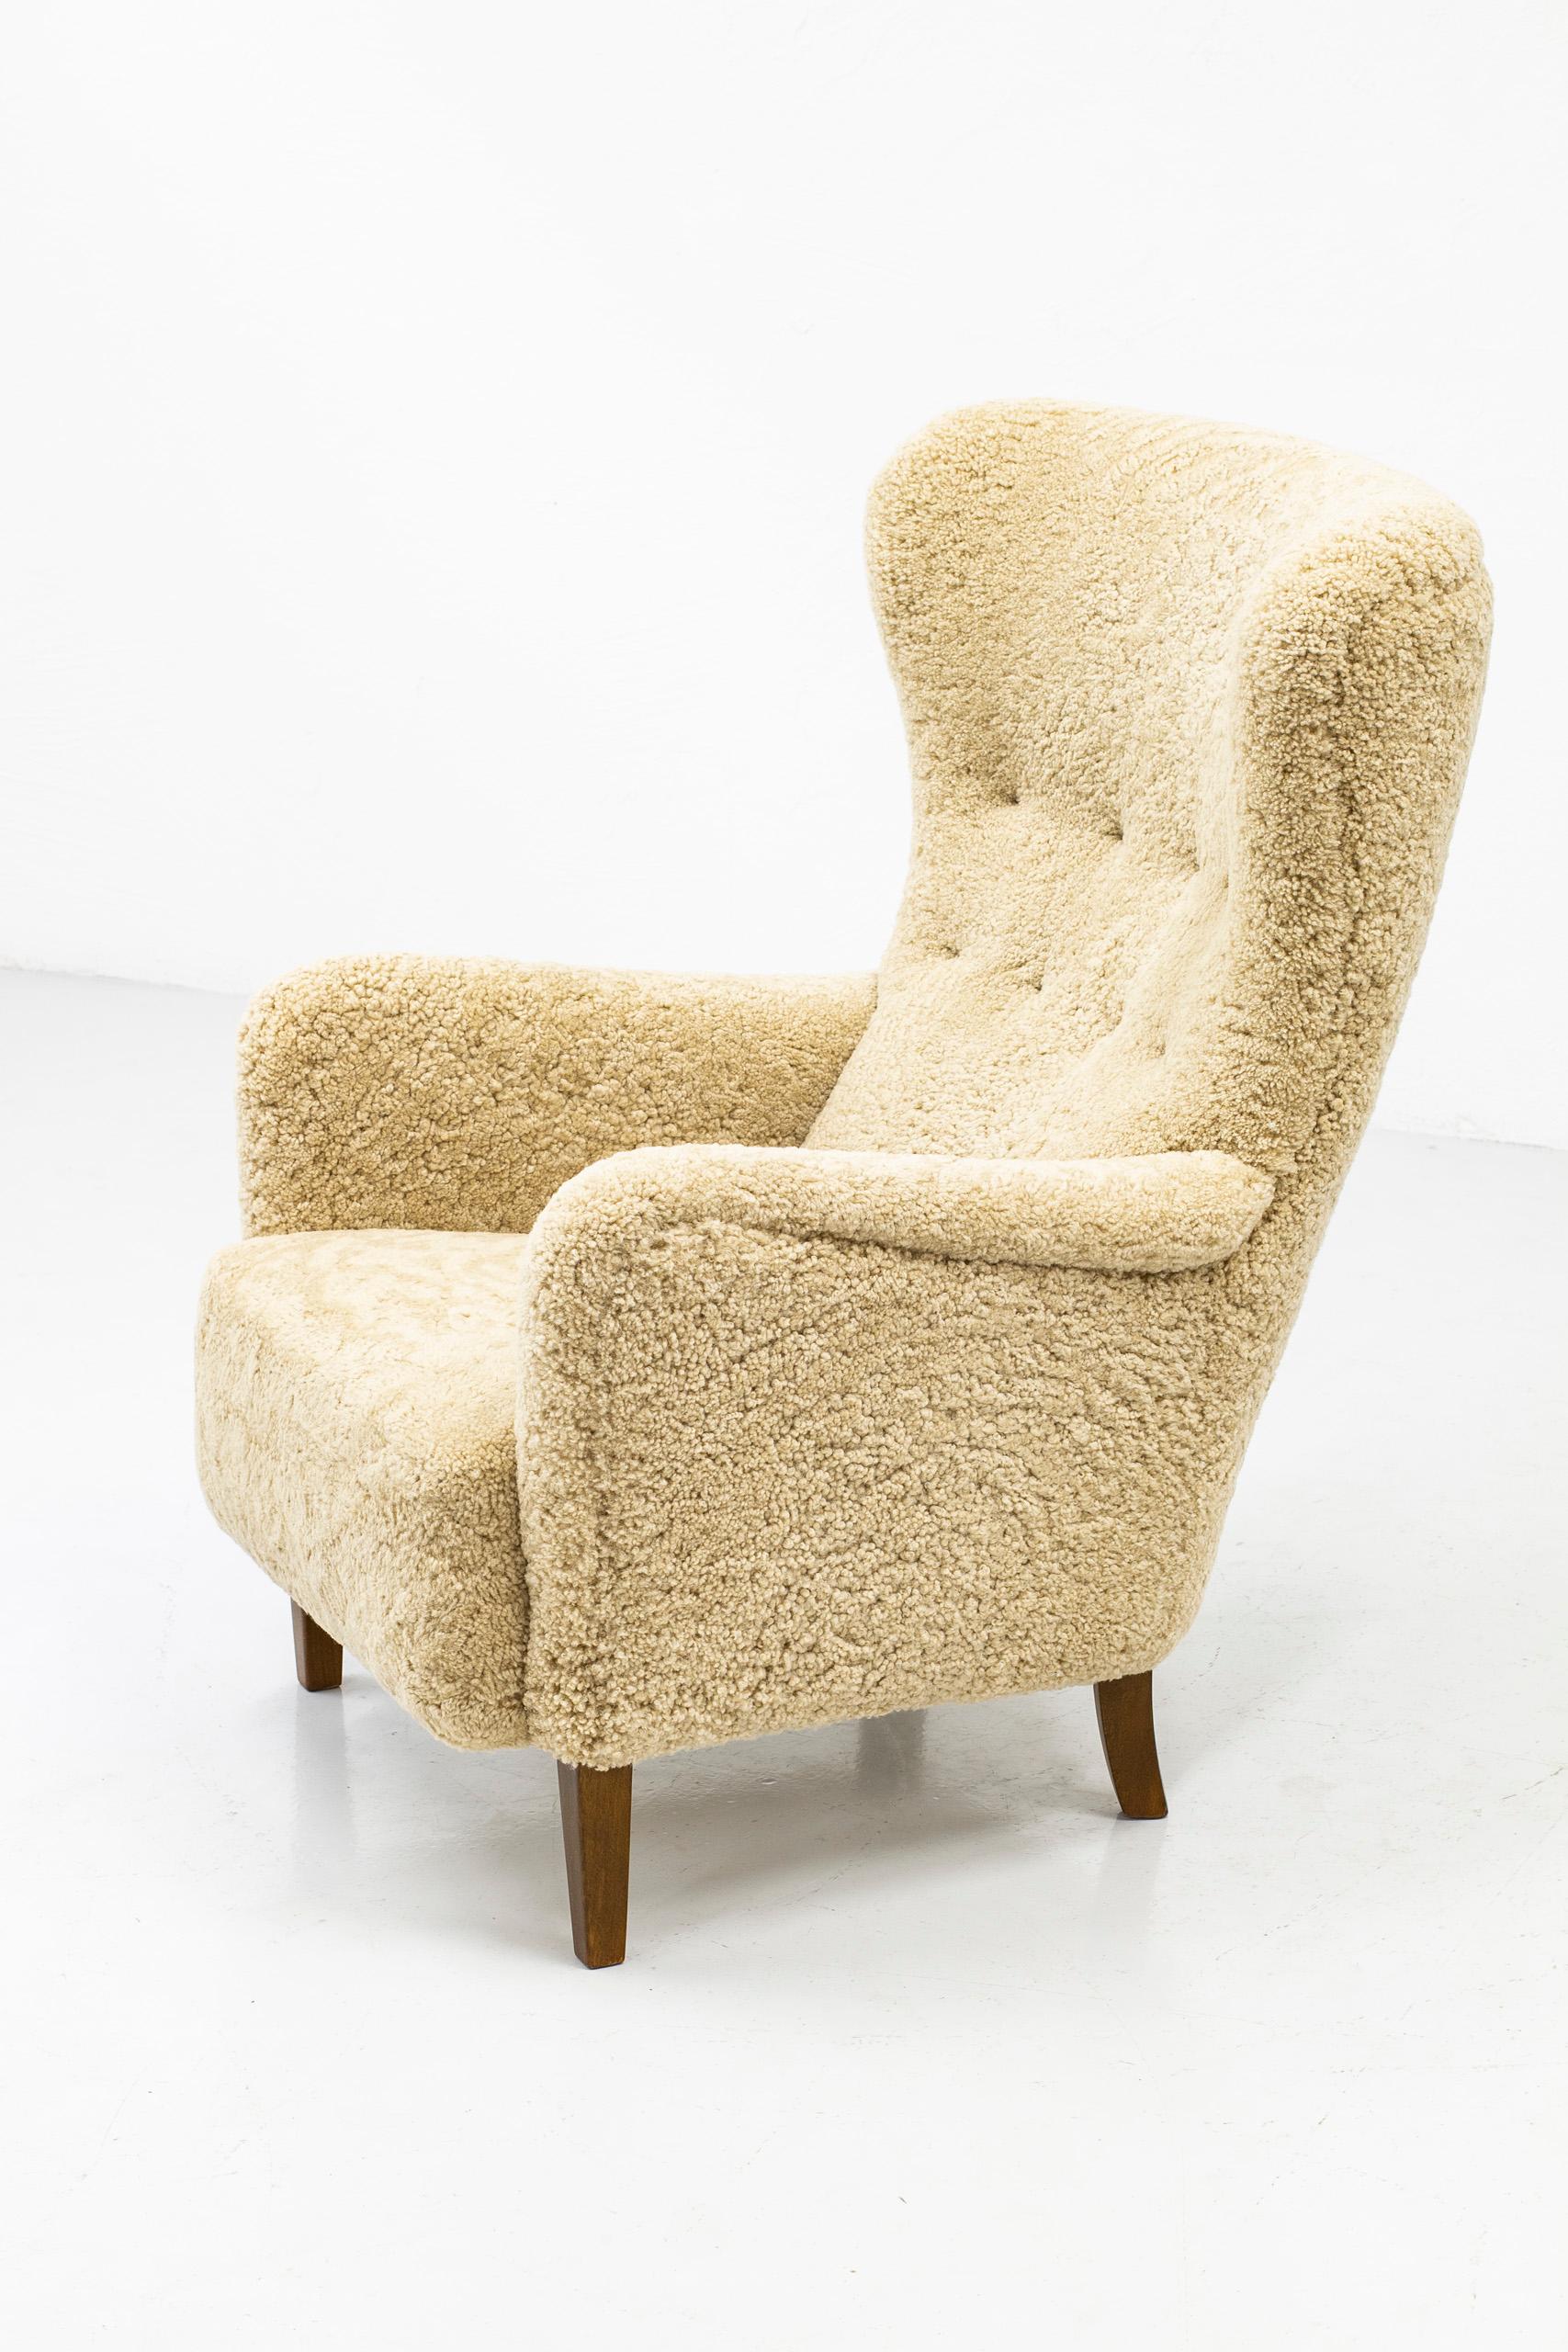 Sheepskin Danish Wing Back Chair with Sheep Skin in the Manner of Frits Henningsen